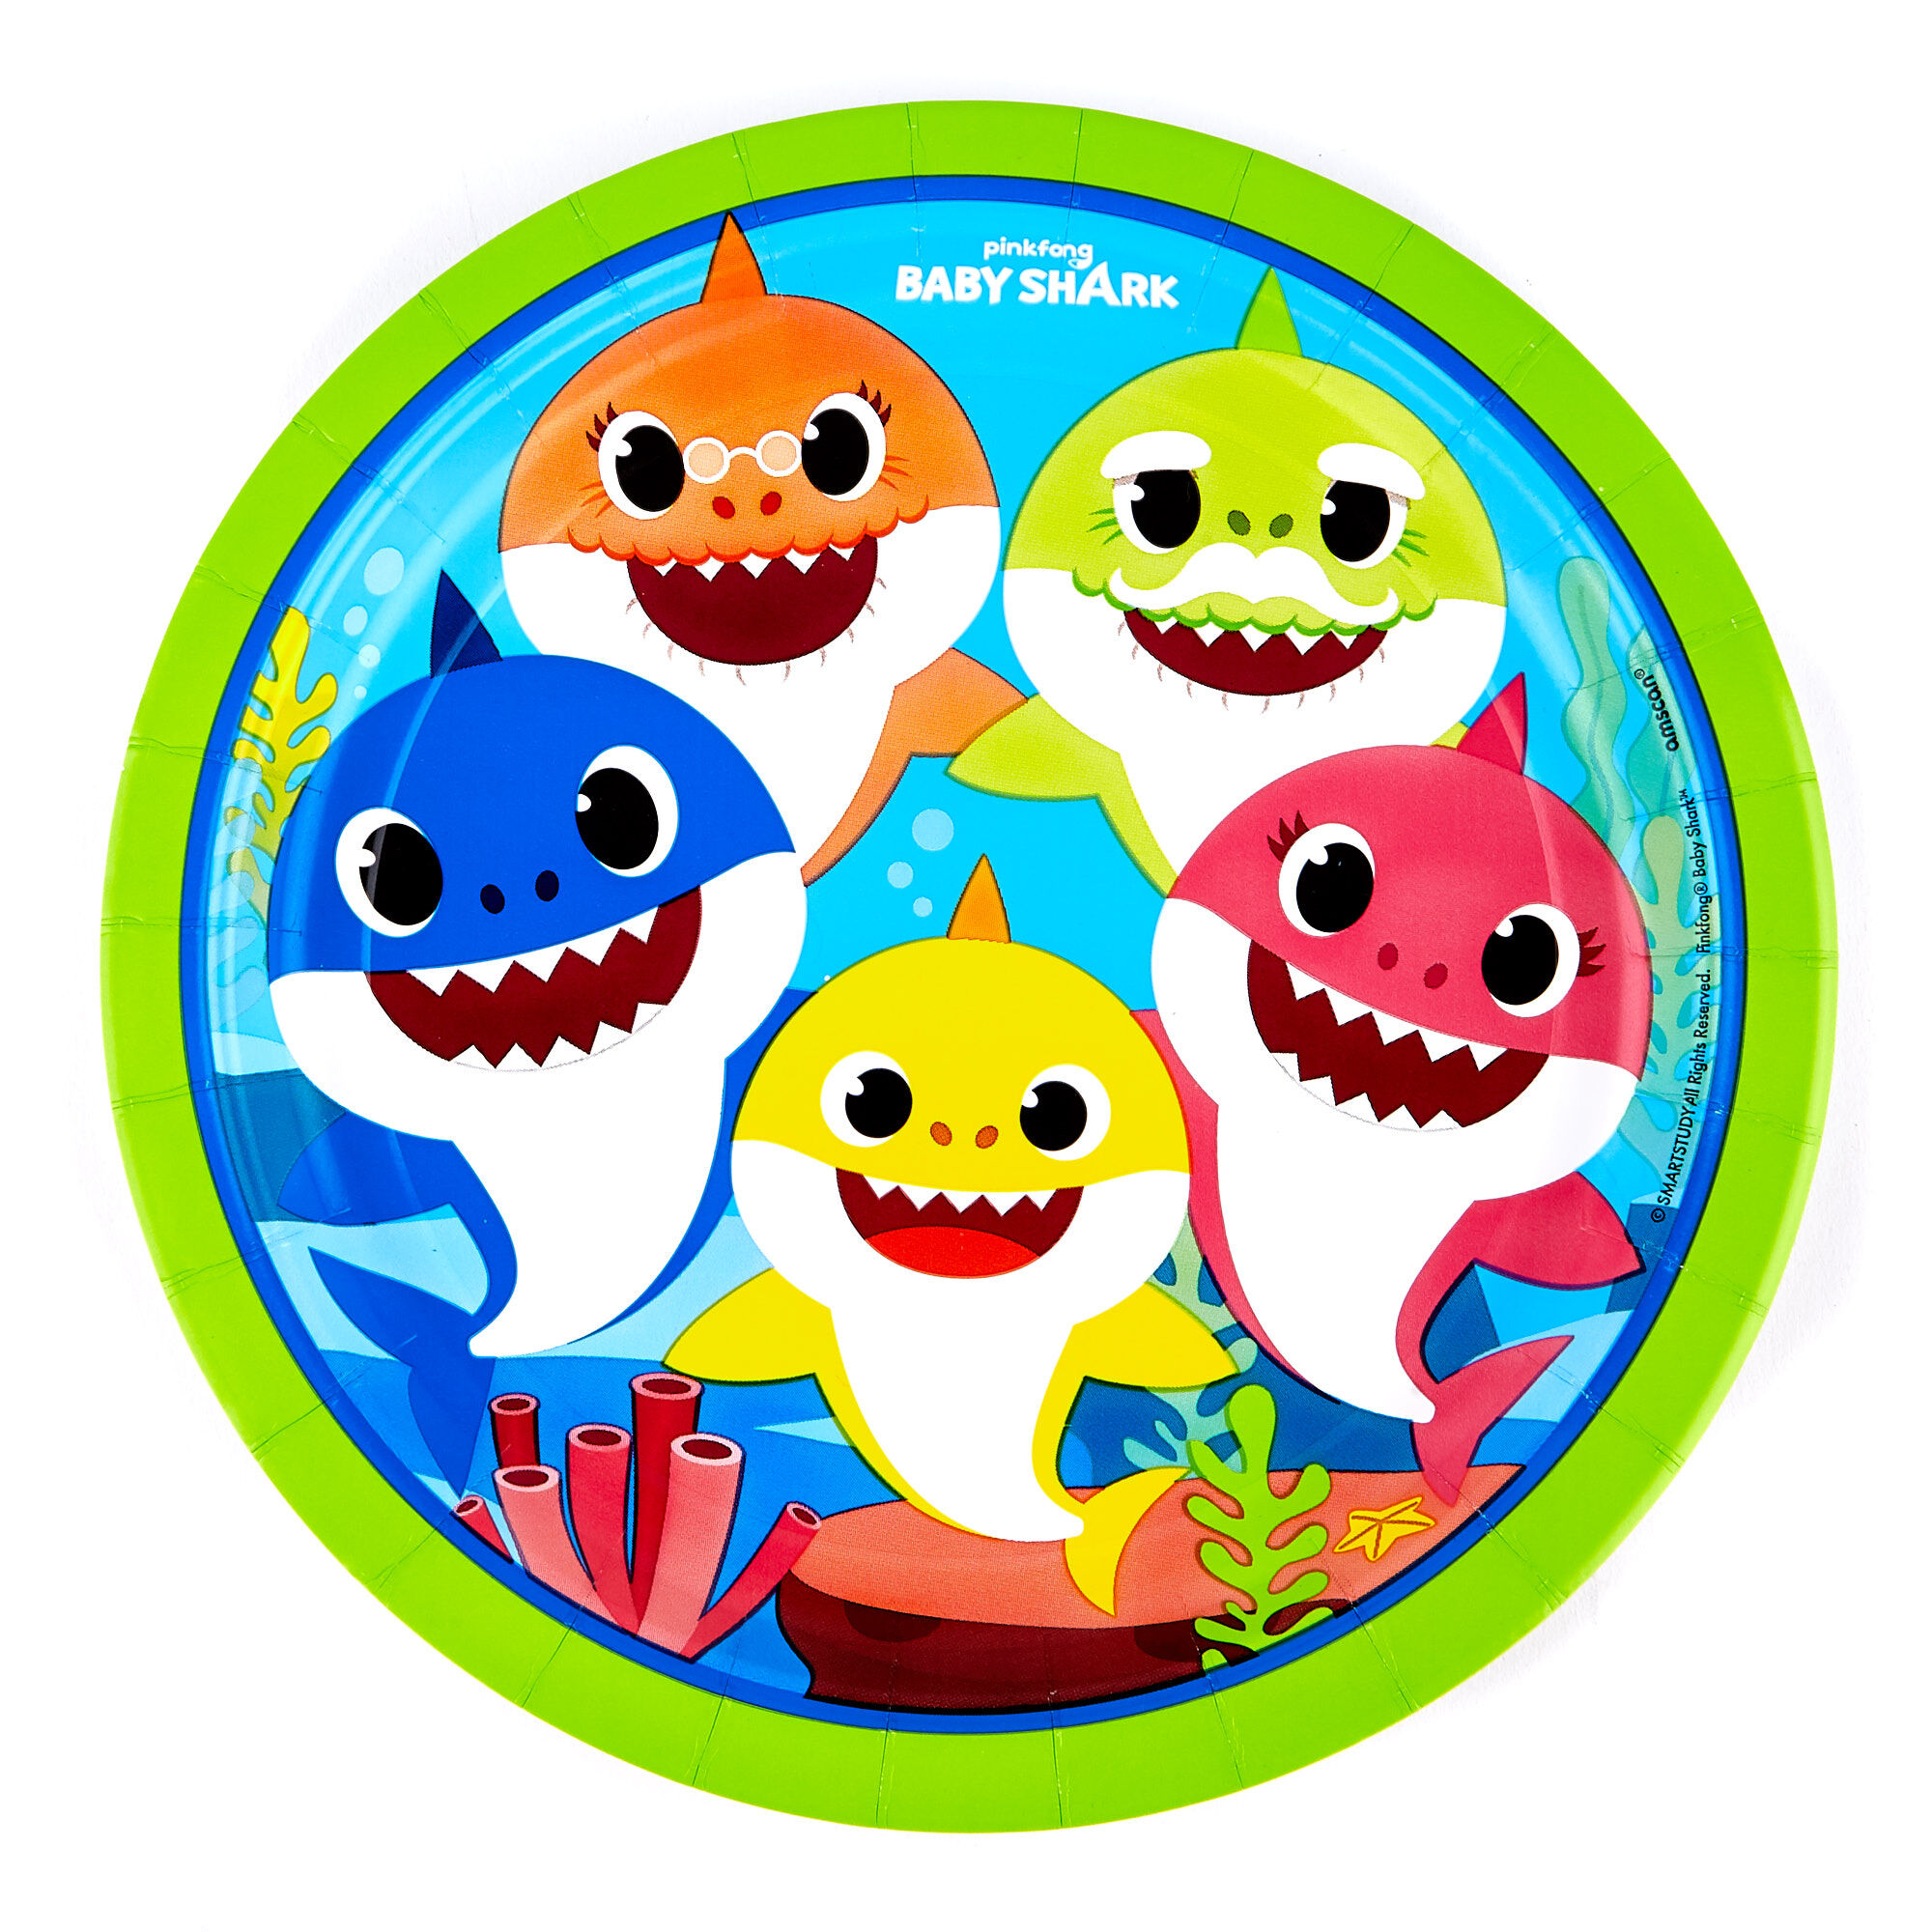 Napkins Shark Party Supplies Set & Tableware kit Includes Plates Cutlery Perfect for Birthday Party Decorations Straws Cups 